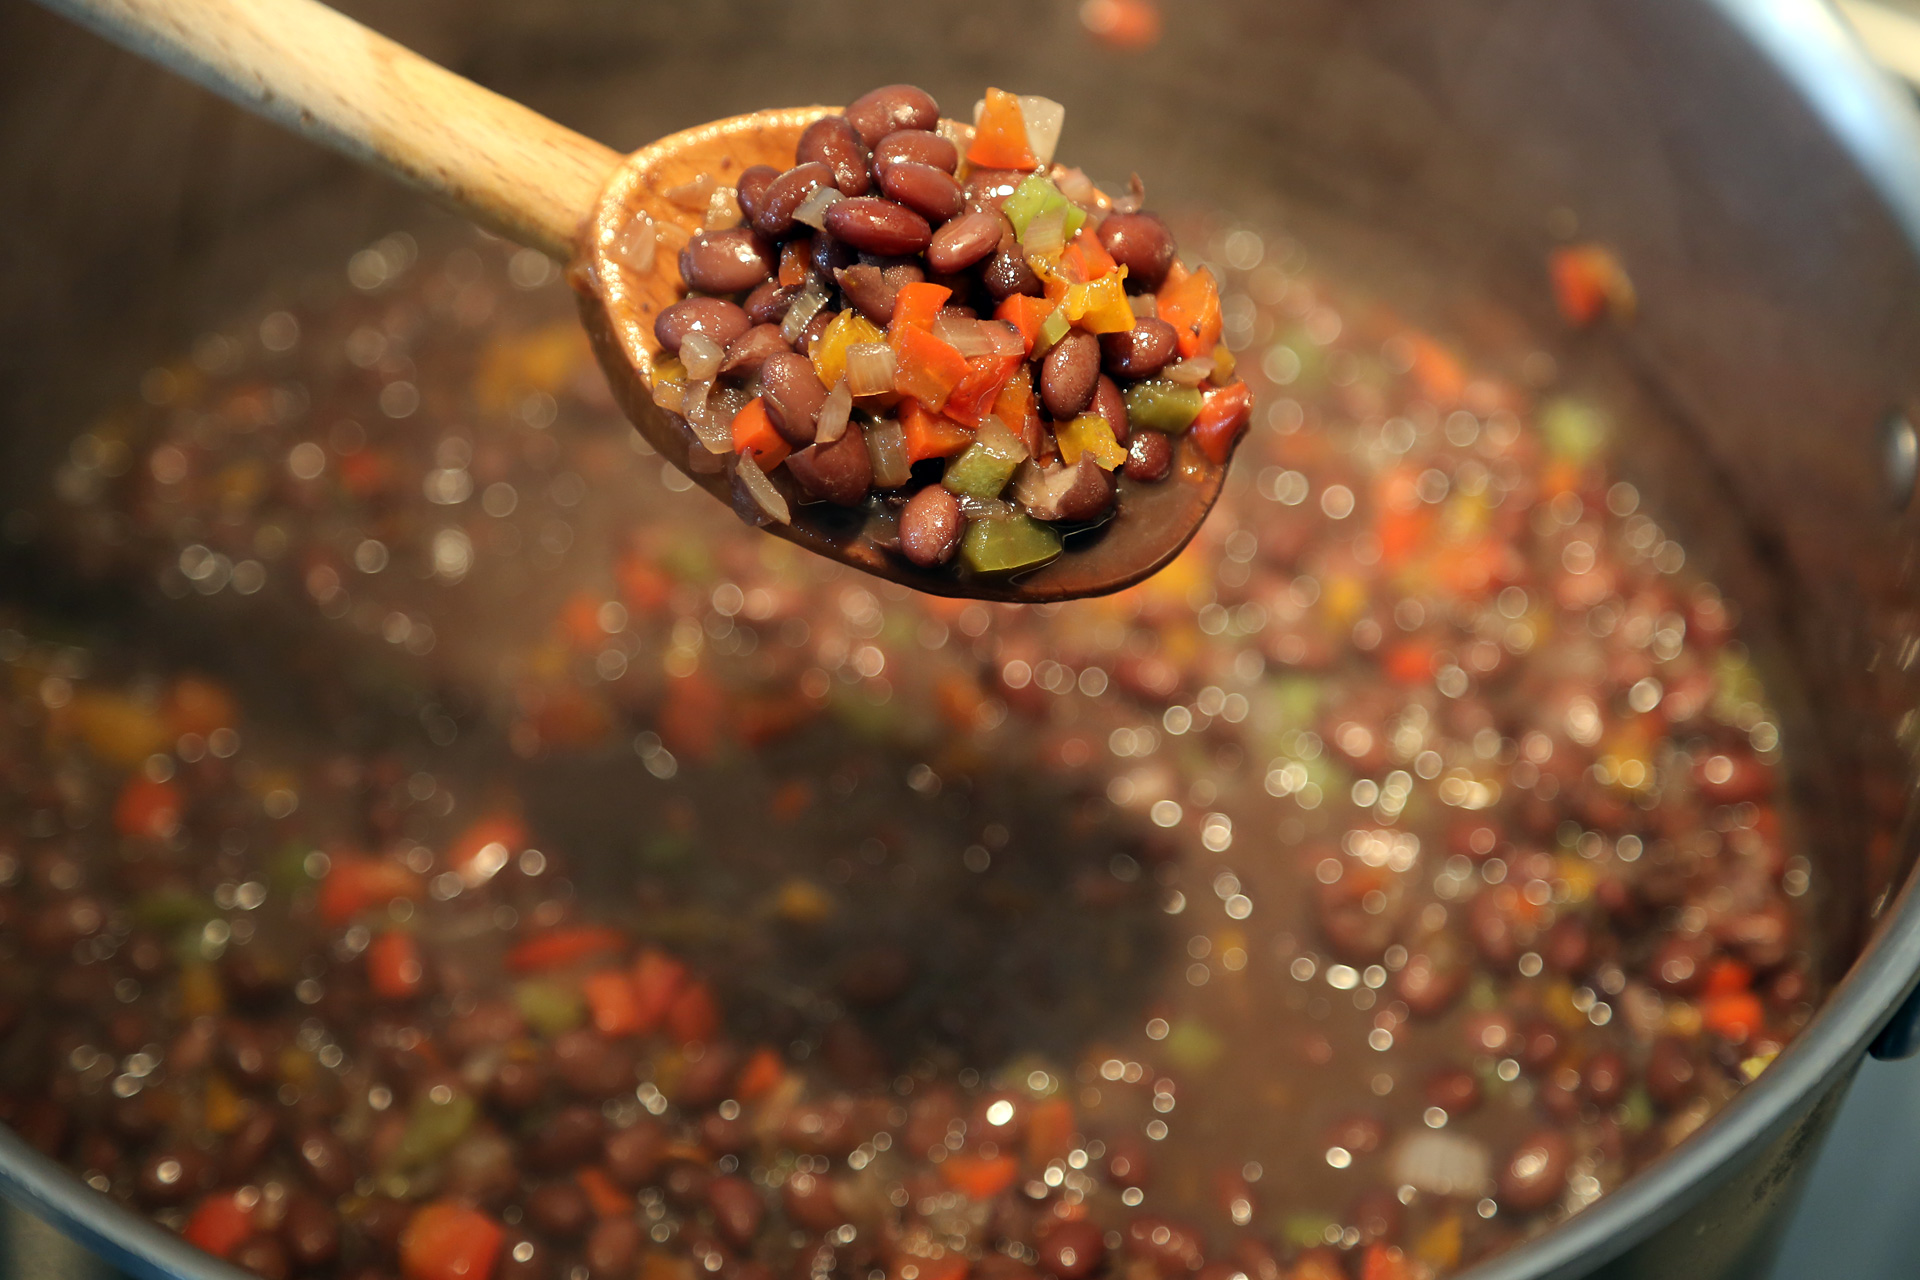 Let simmer for 15 minutes longer, then taste and adjust the seasonings with salt, pepper, sugar, and hot sauce.